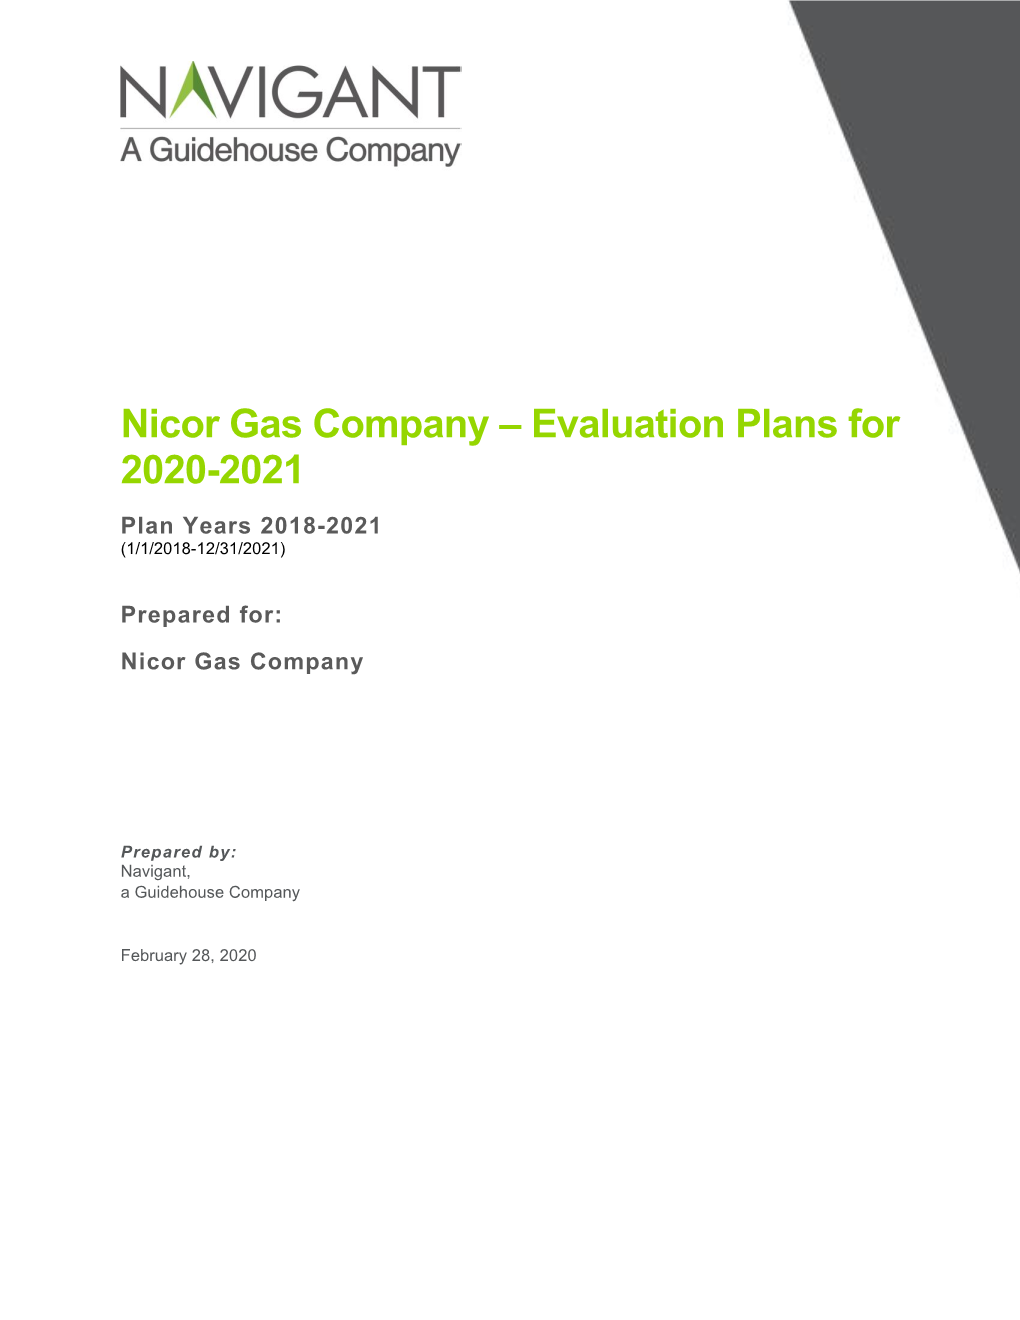 Nicor Gas Company – Evaluation Plans for 2020-2021 Plan Years 2018-2021 (1/1/2018-12/31/2021)